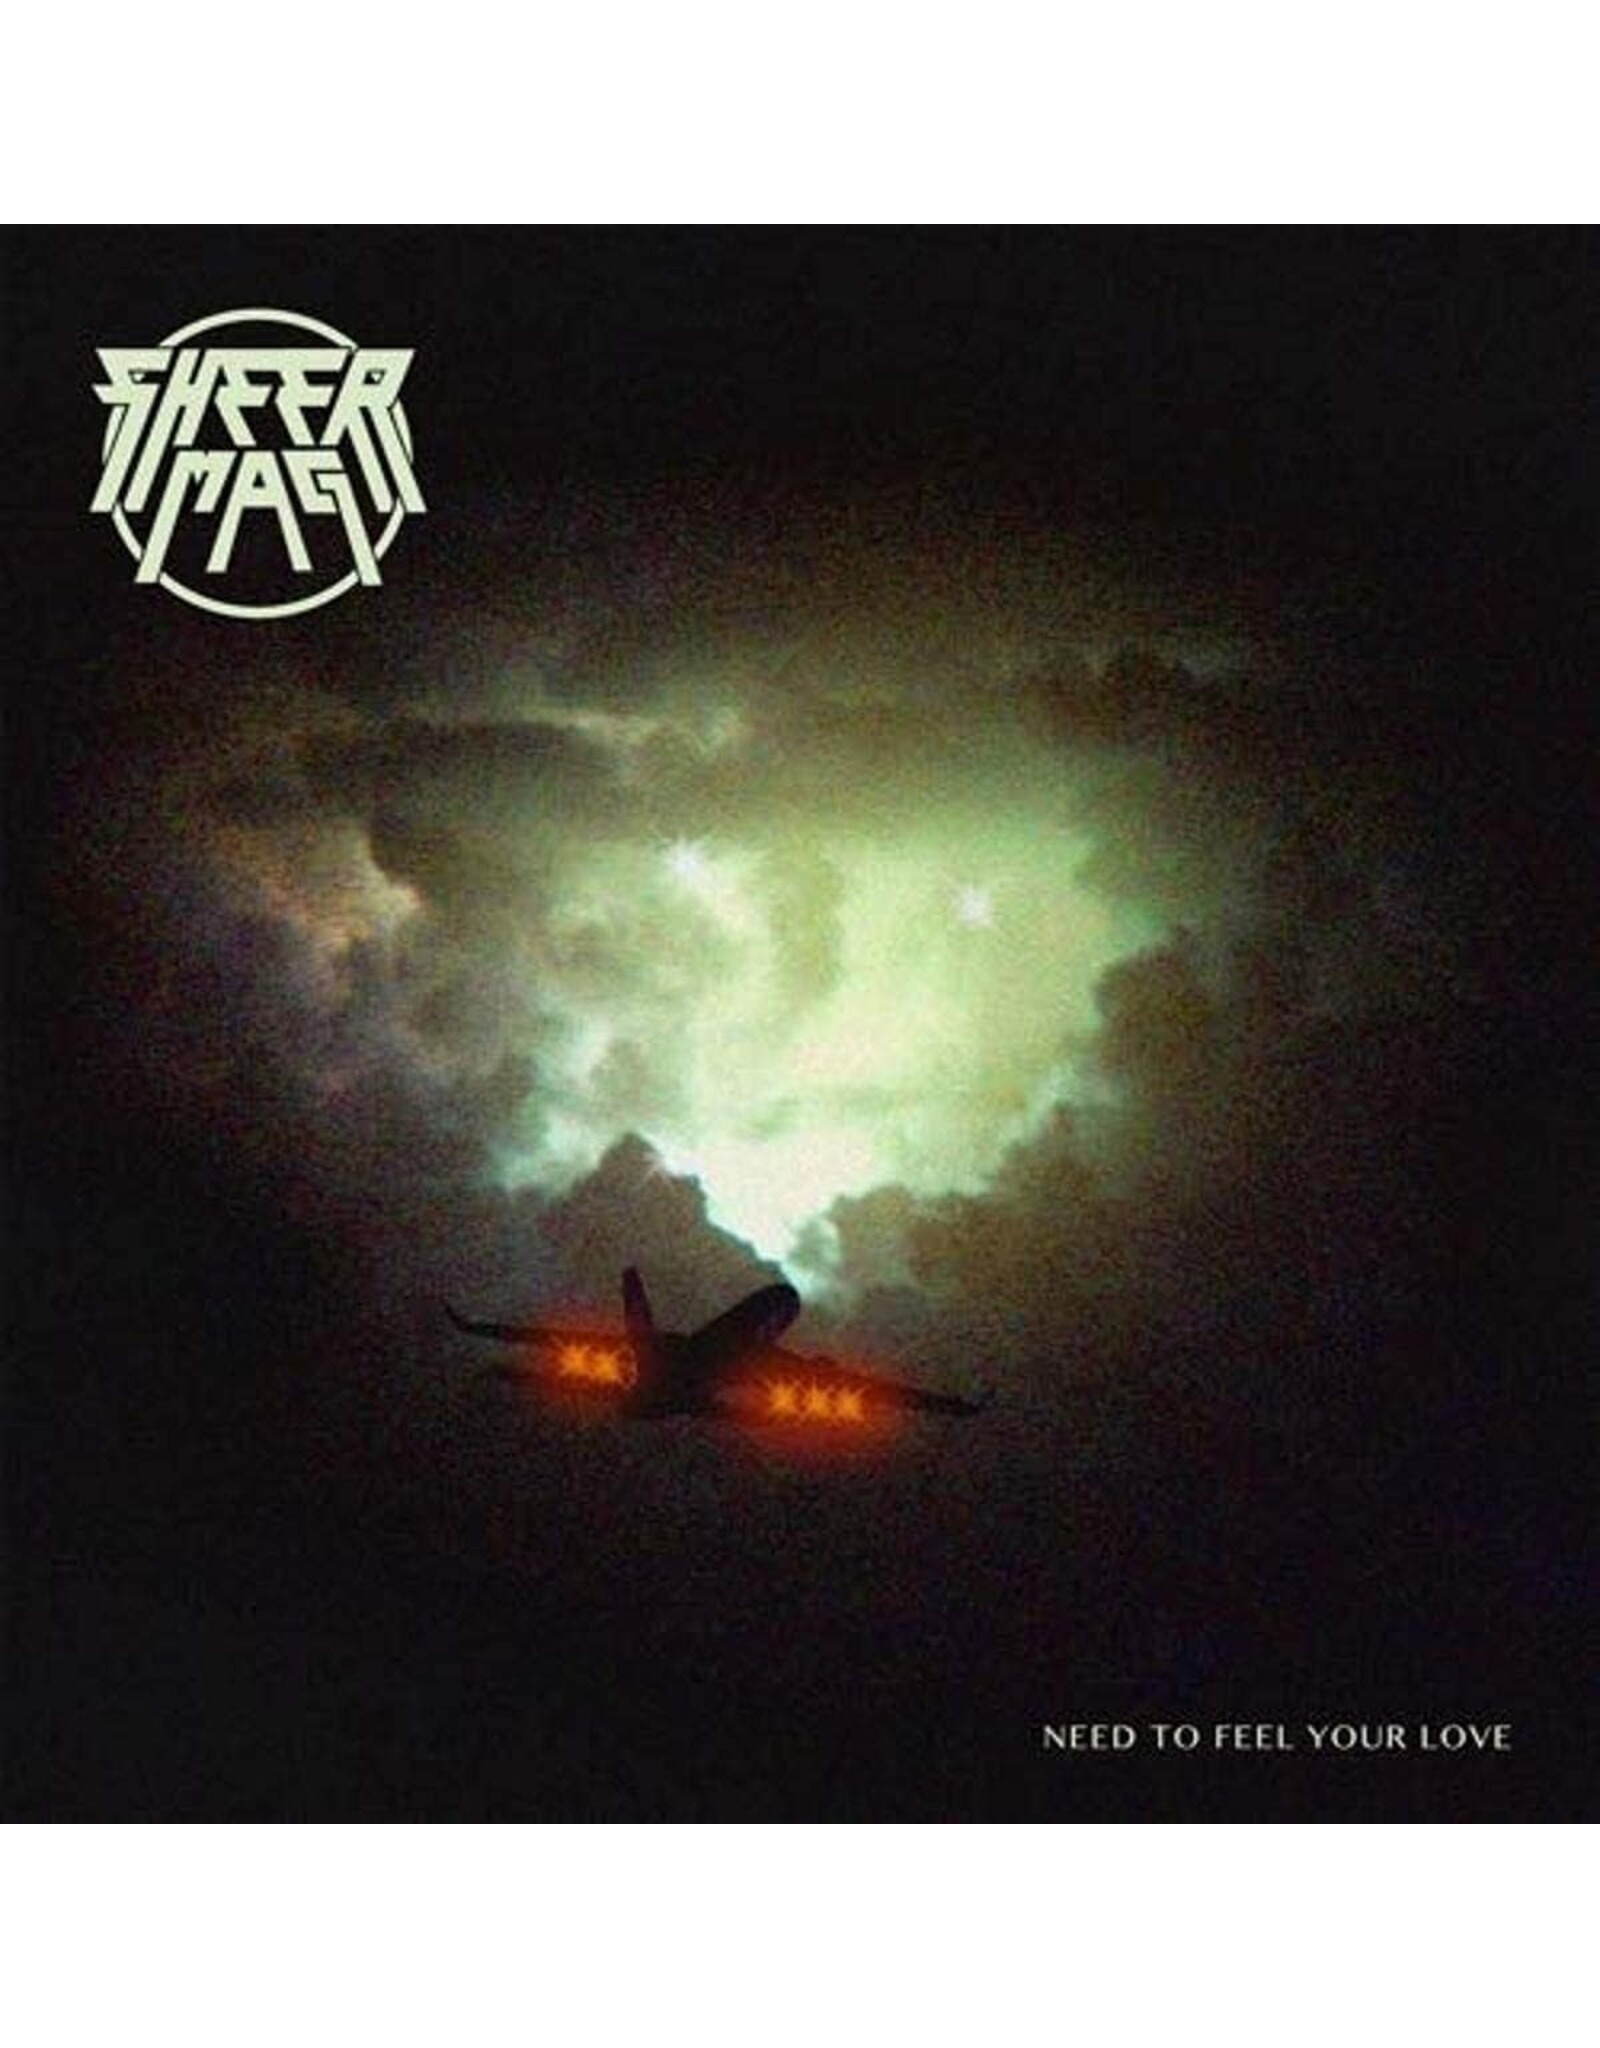 Sheer Mag - Need To Feel Your Love (Exclusive Coke Bottle Clear Vinyl)